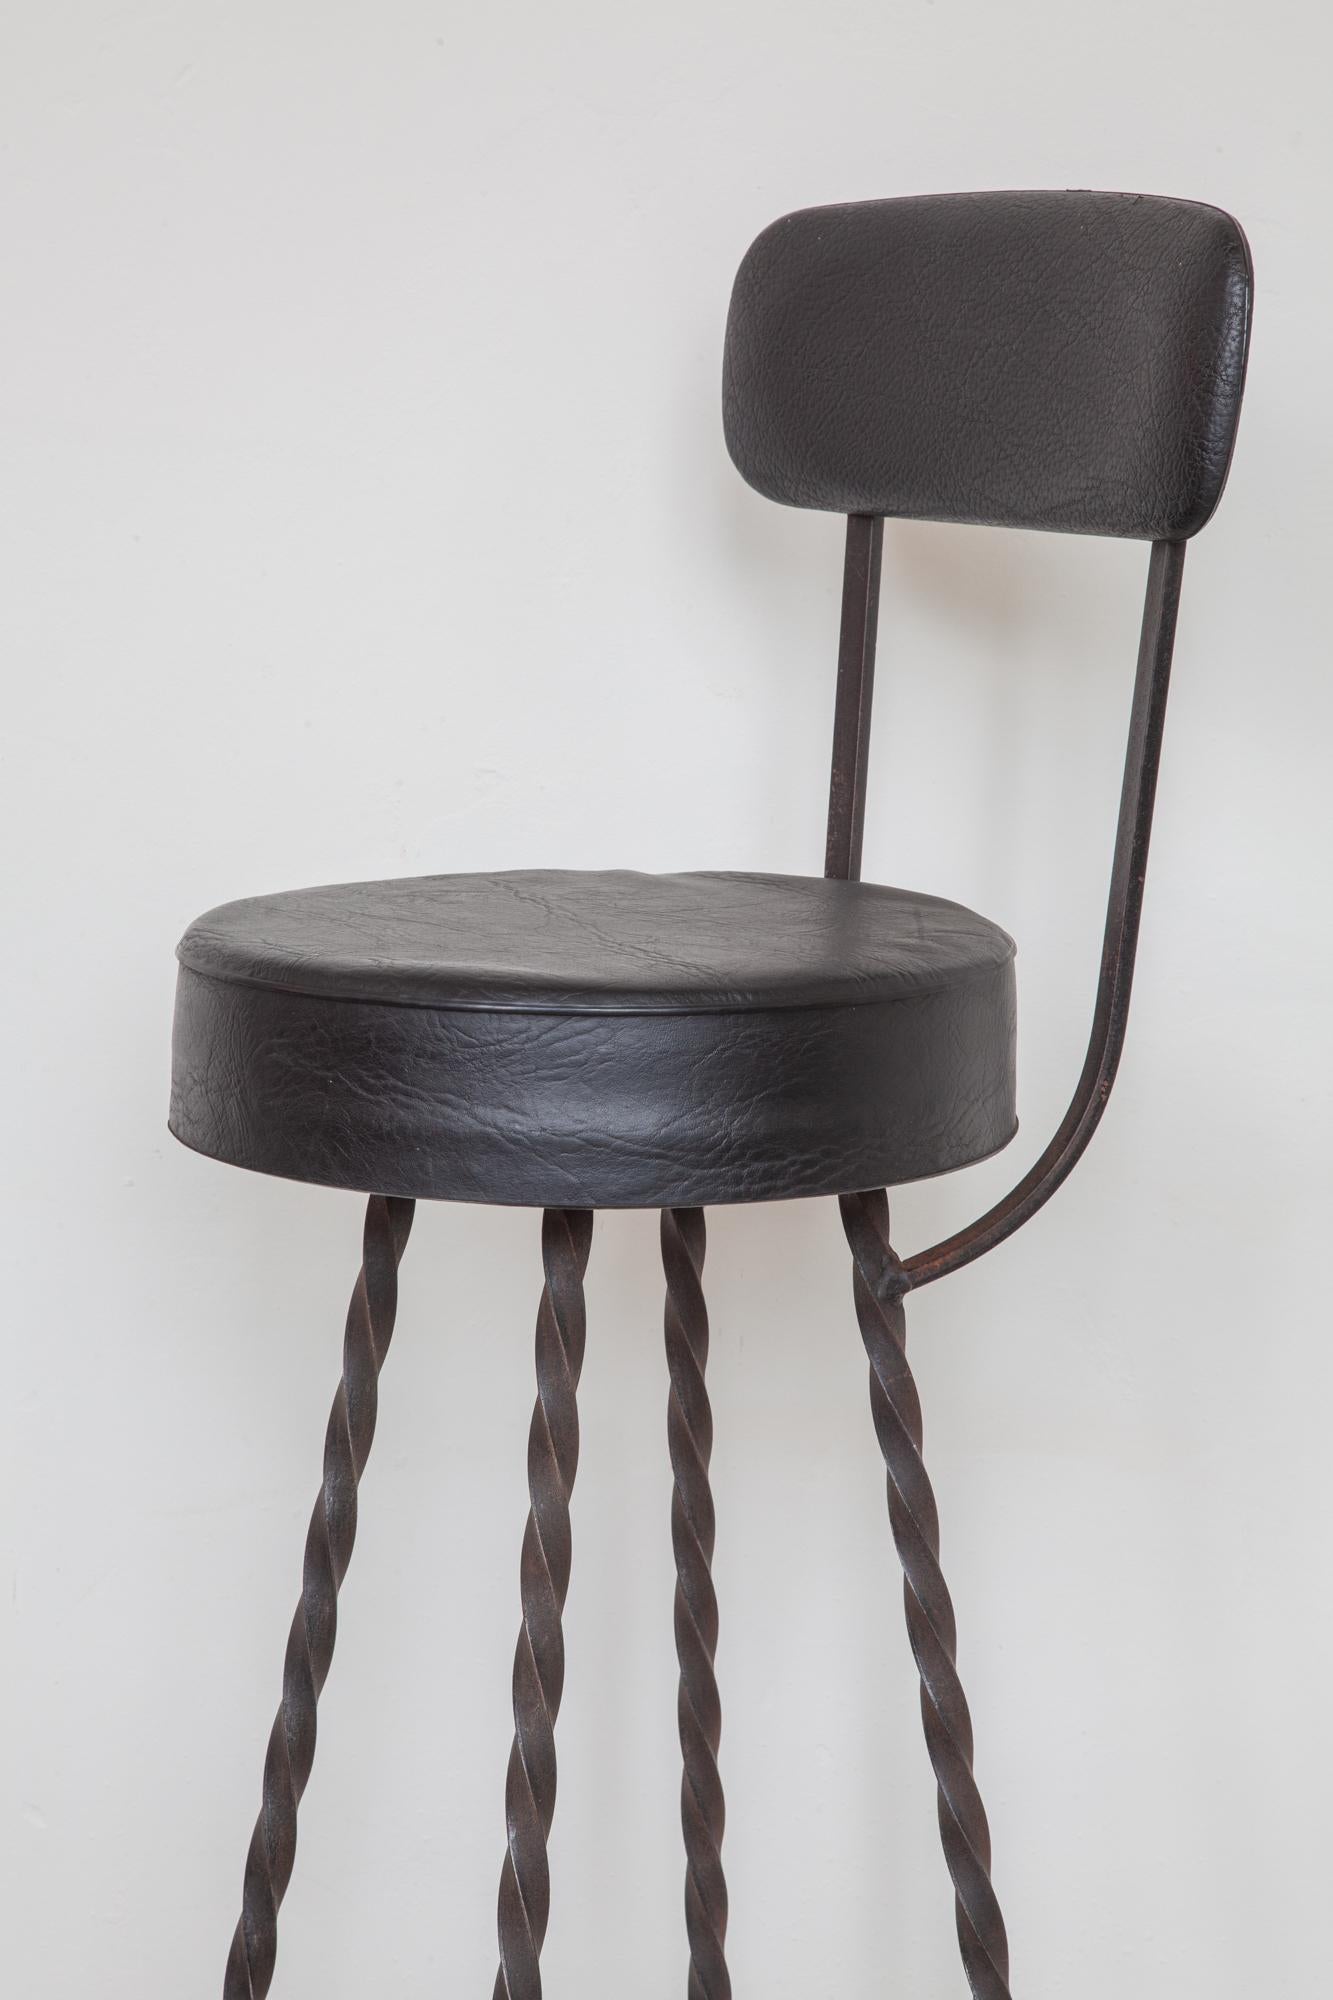 French Brutalist Style Set of Four Wrought Iron Bar Stools Made in 1970S, FRANCE